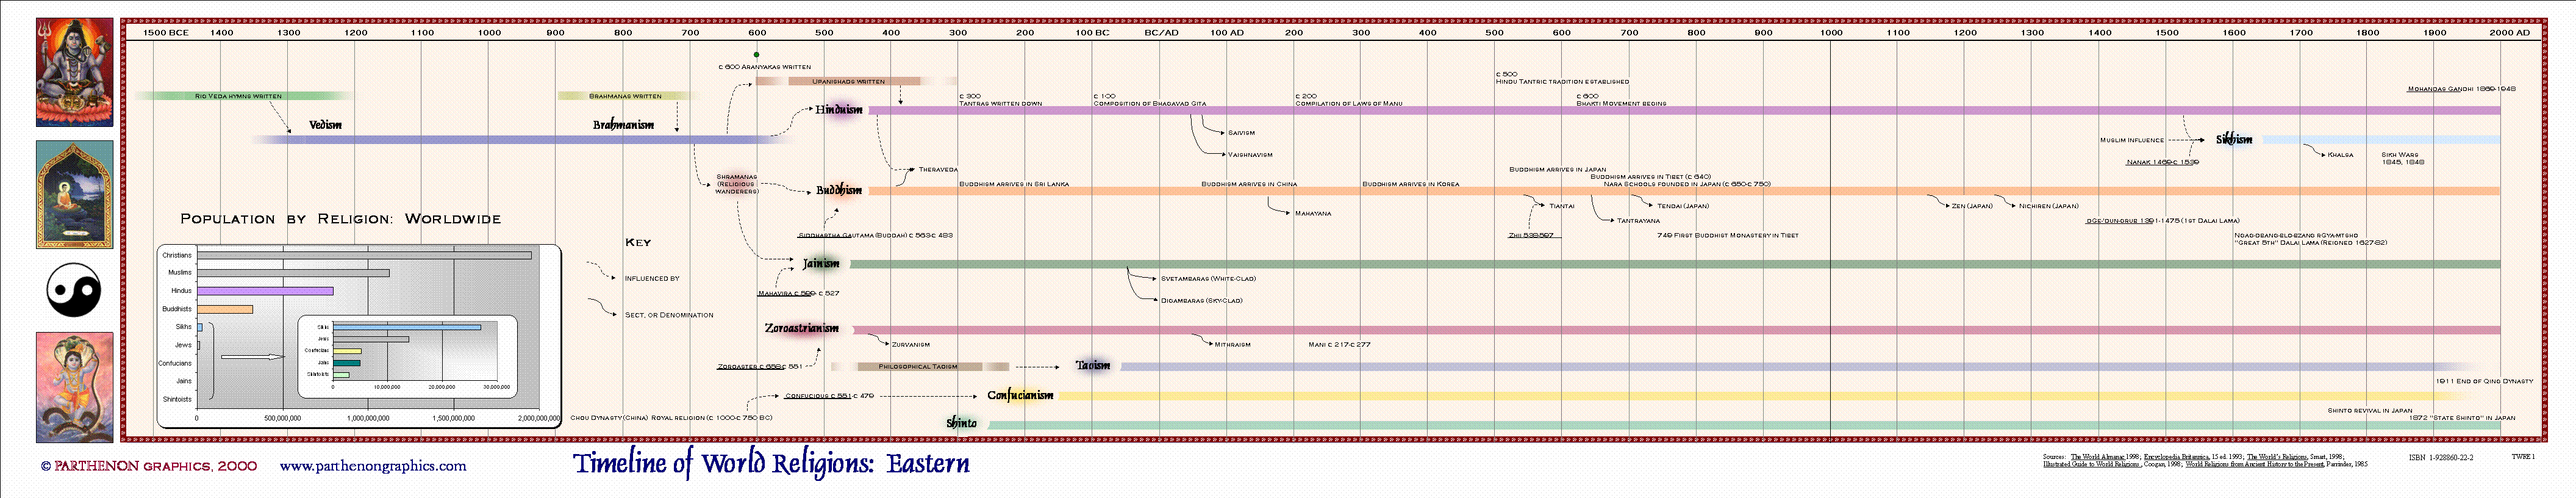 Timeline Of World Religions Chart